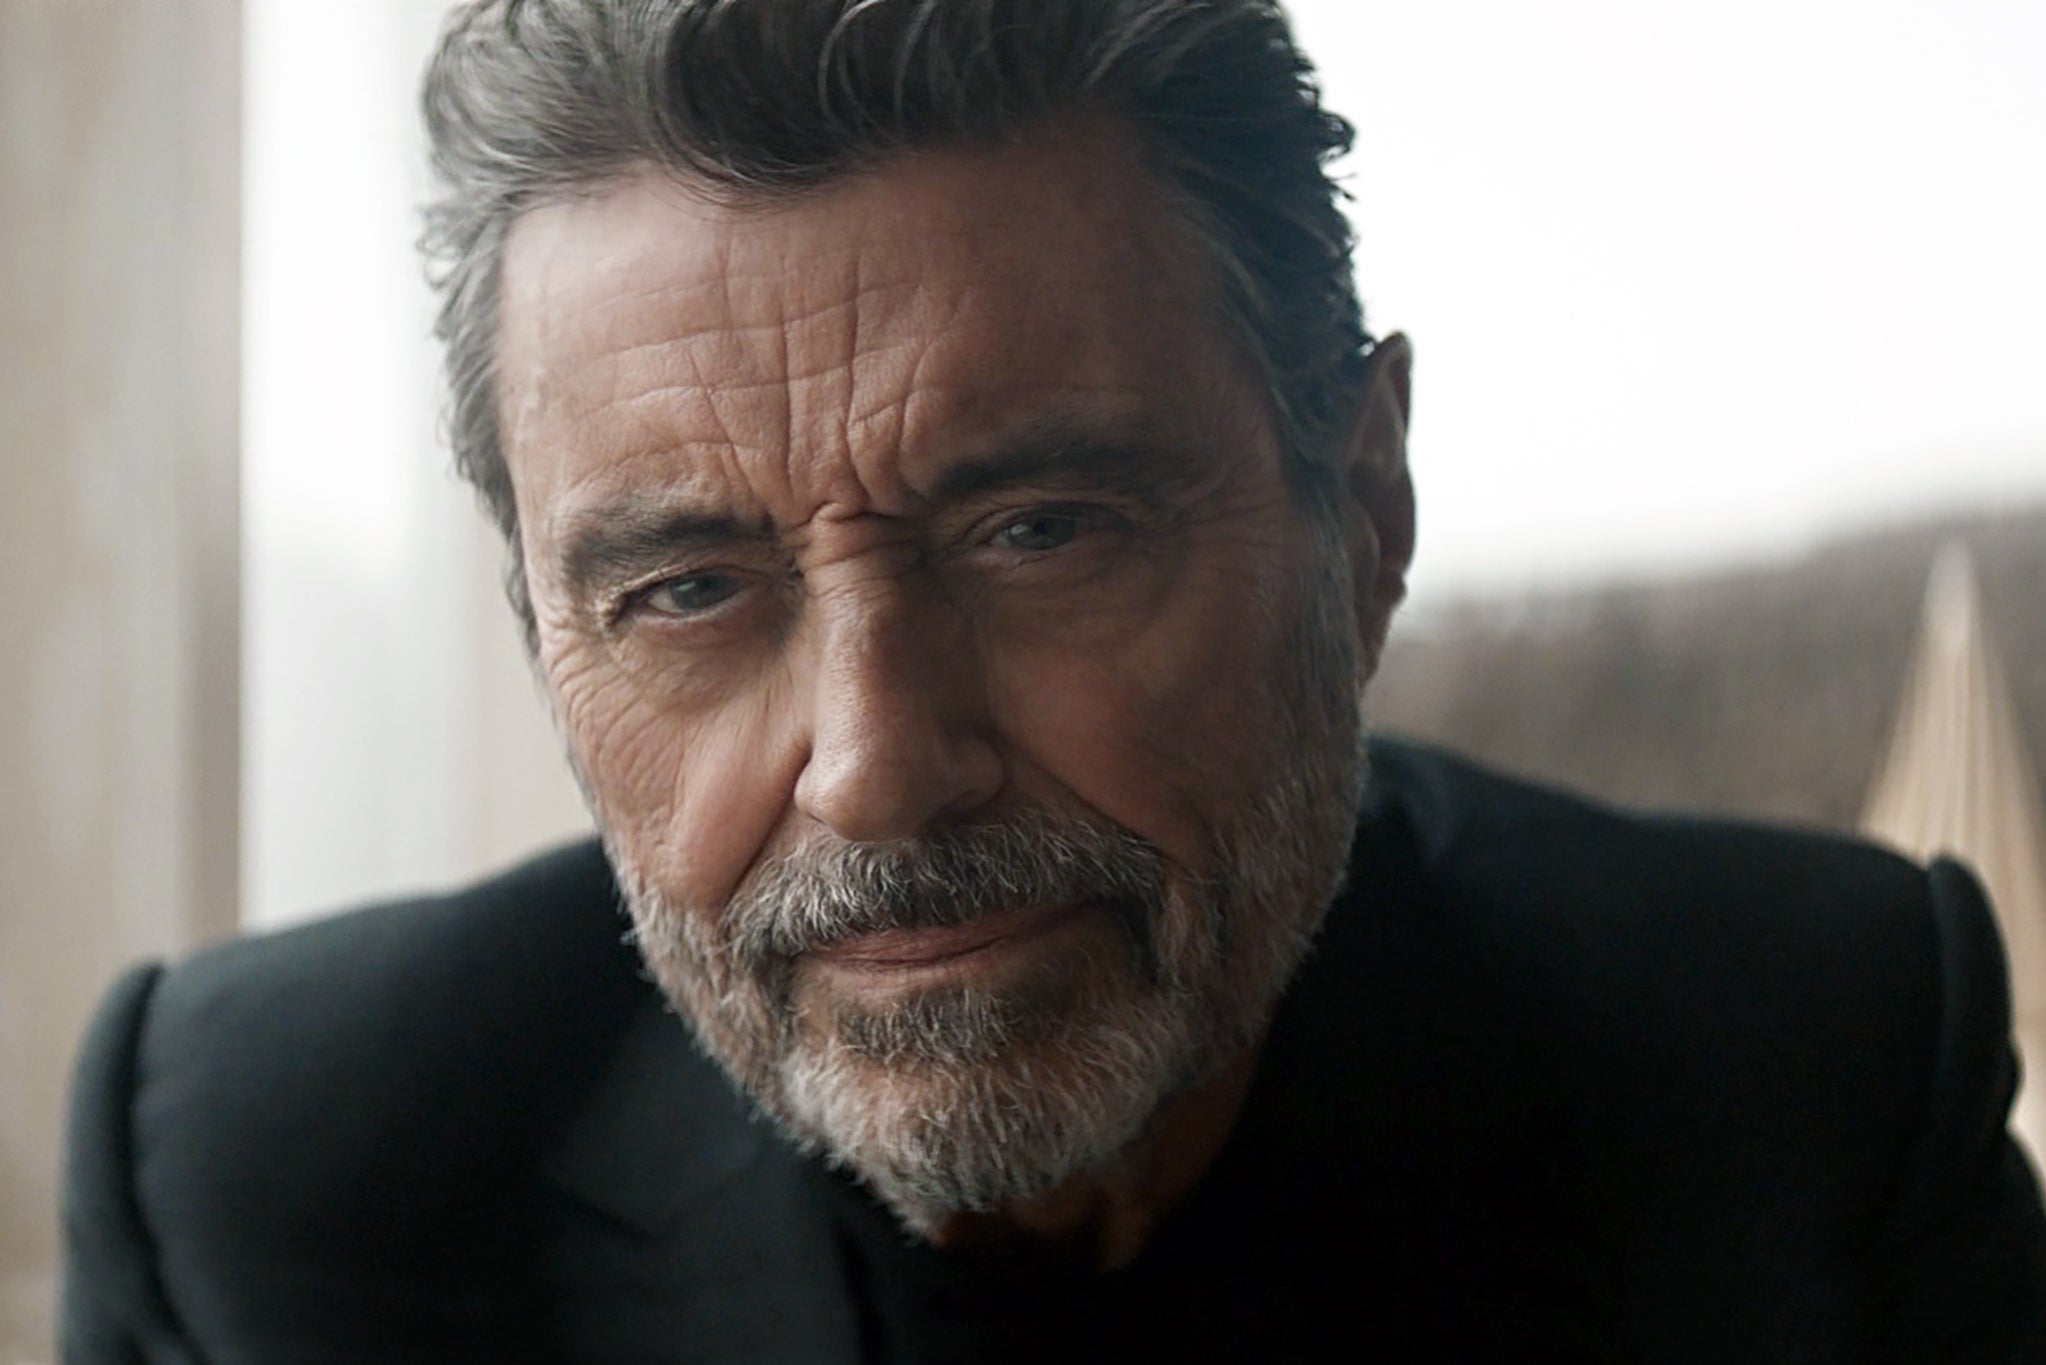 Ian McShane: ‘When you make big movies like John Wick, it’s like you’re a small army that takes over town'